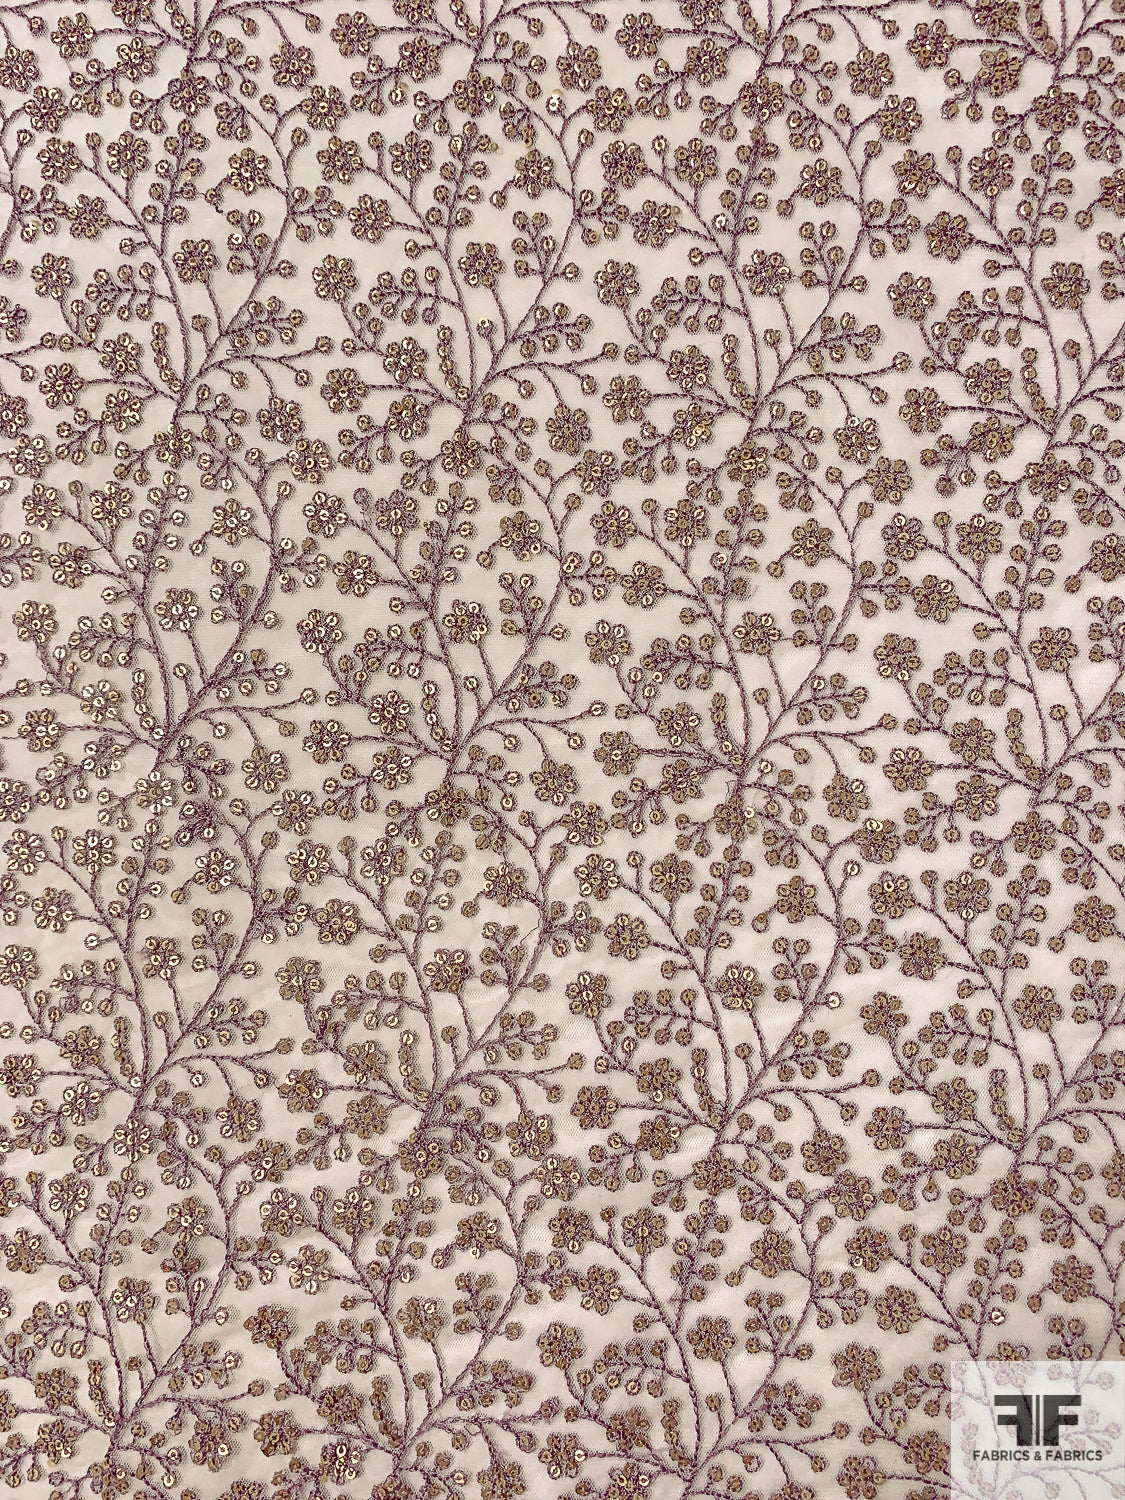 Ditsy Vine Floral Embroidered Netting with Sequins - Lilac / Antique Gold / Off-White